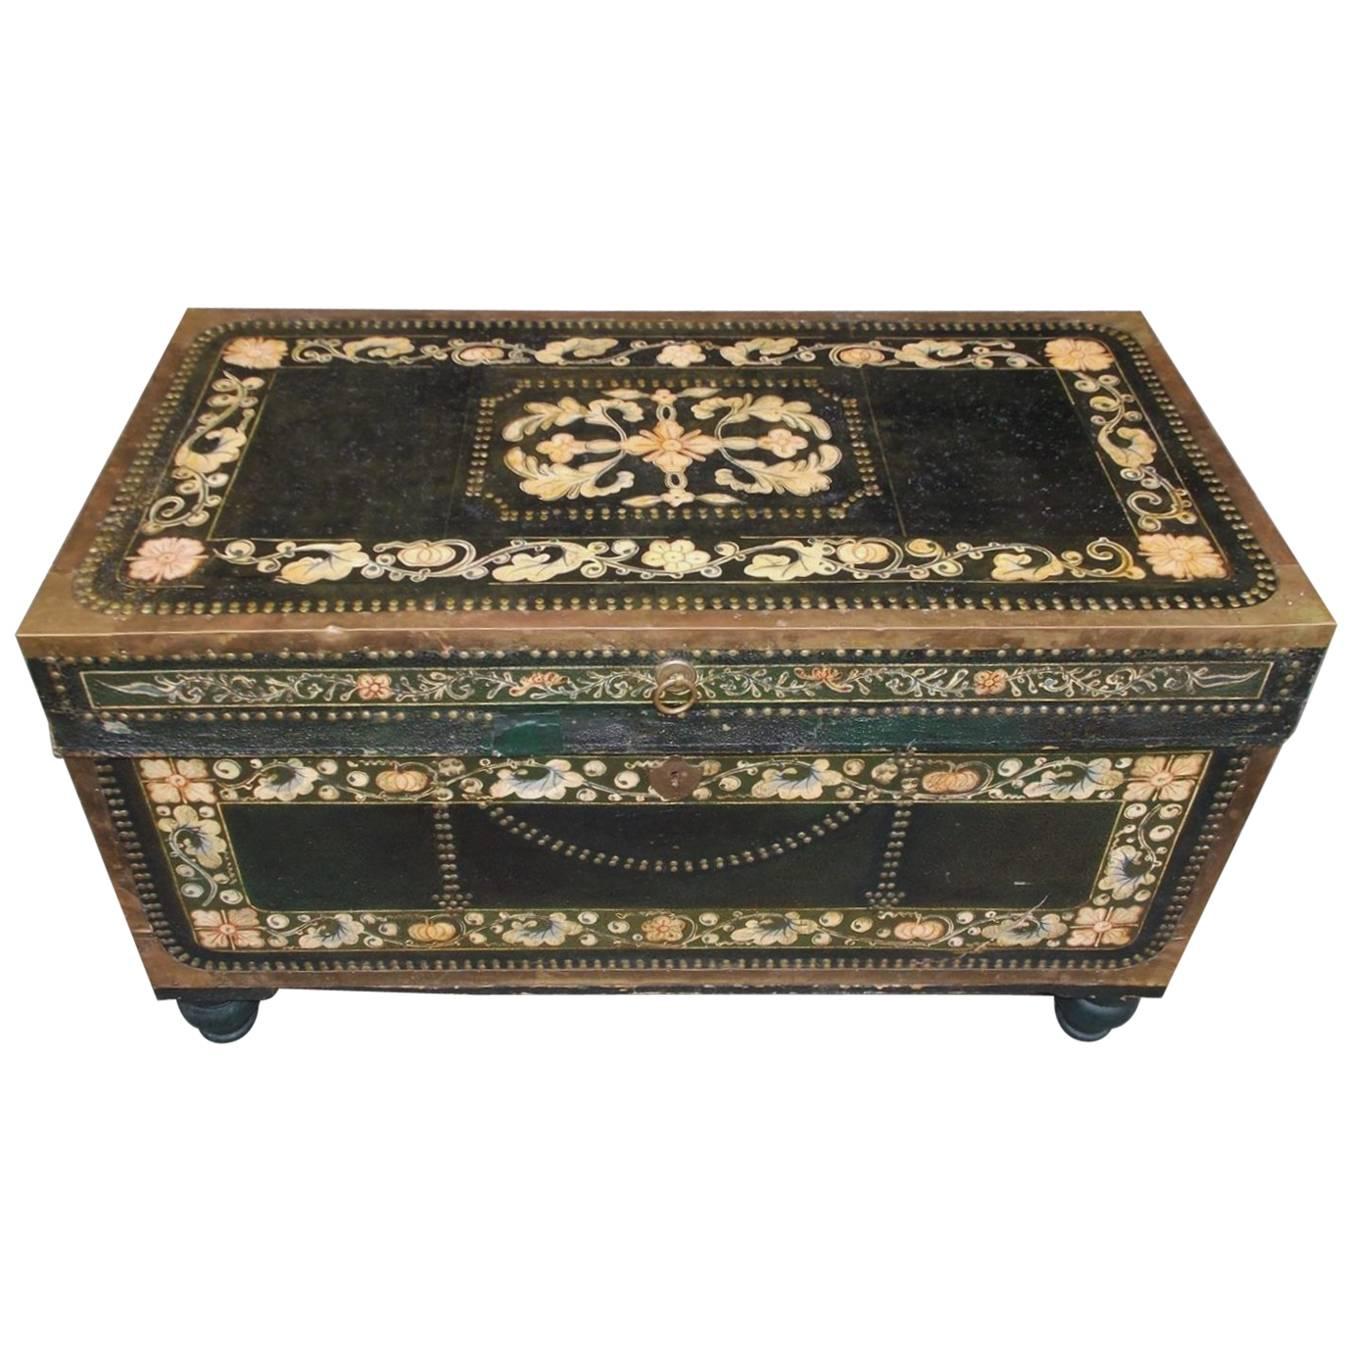 Chinese Campaign Camphor Wood Floral Painted Leather Nautical Chest, Circa 1820